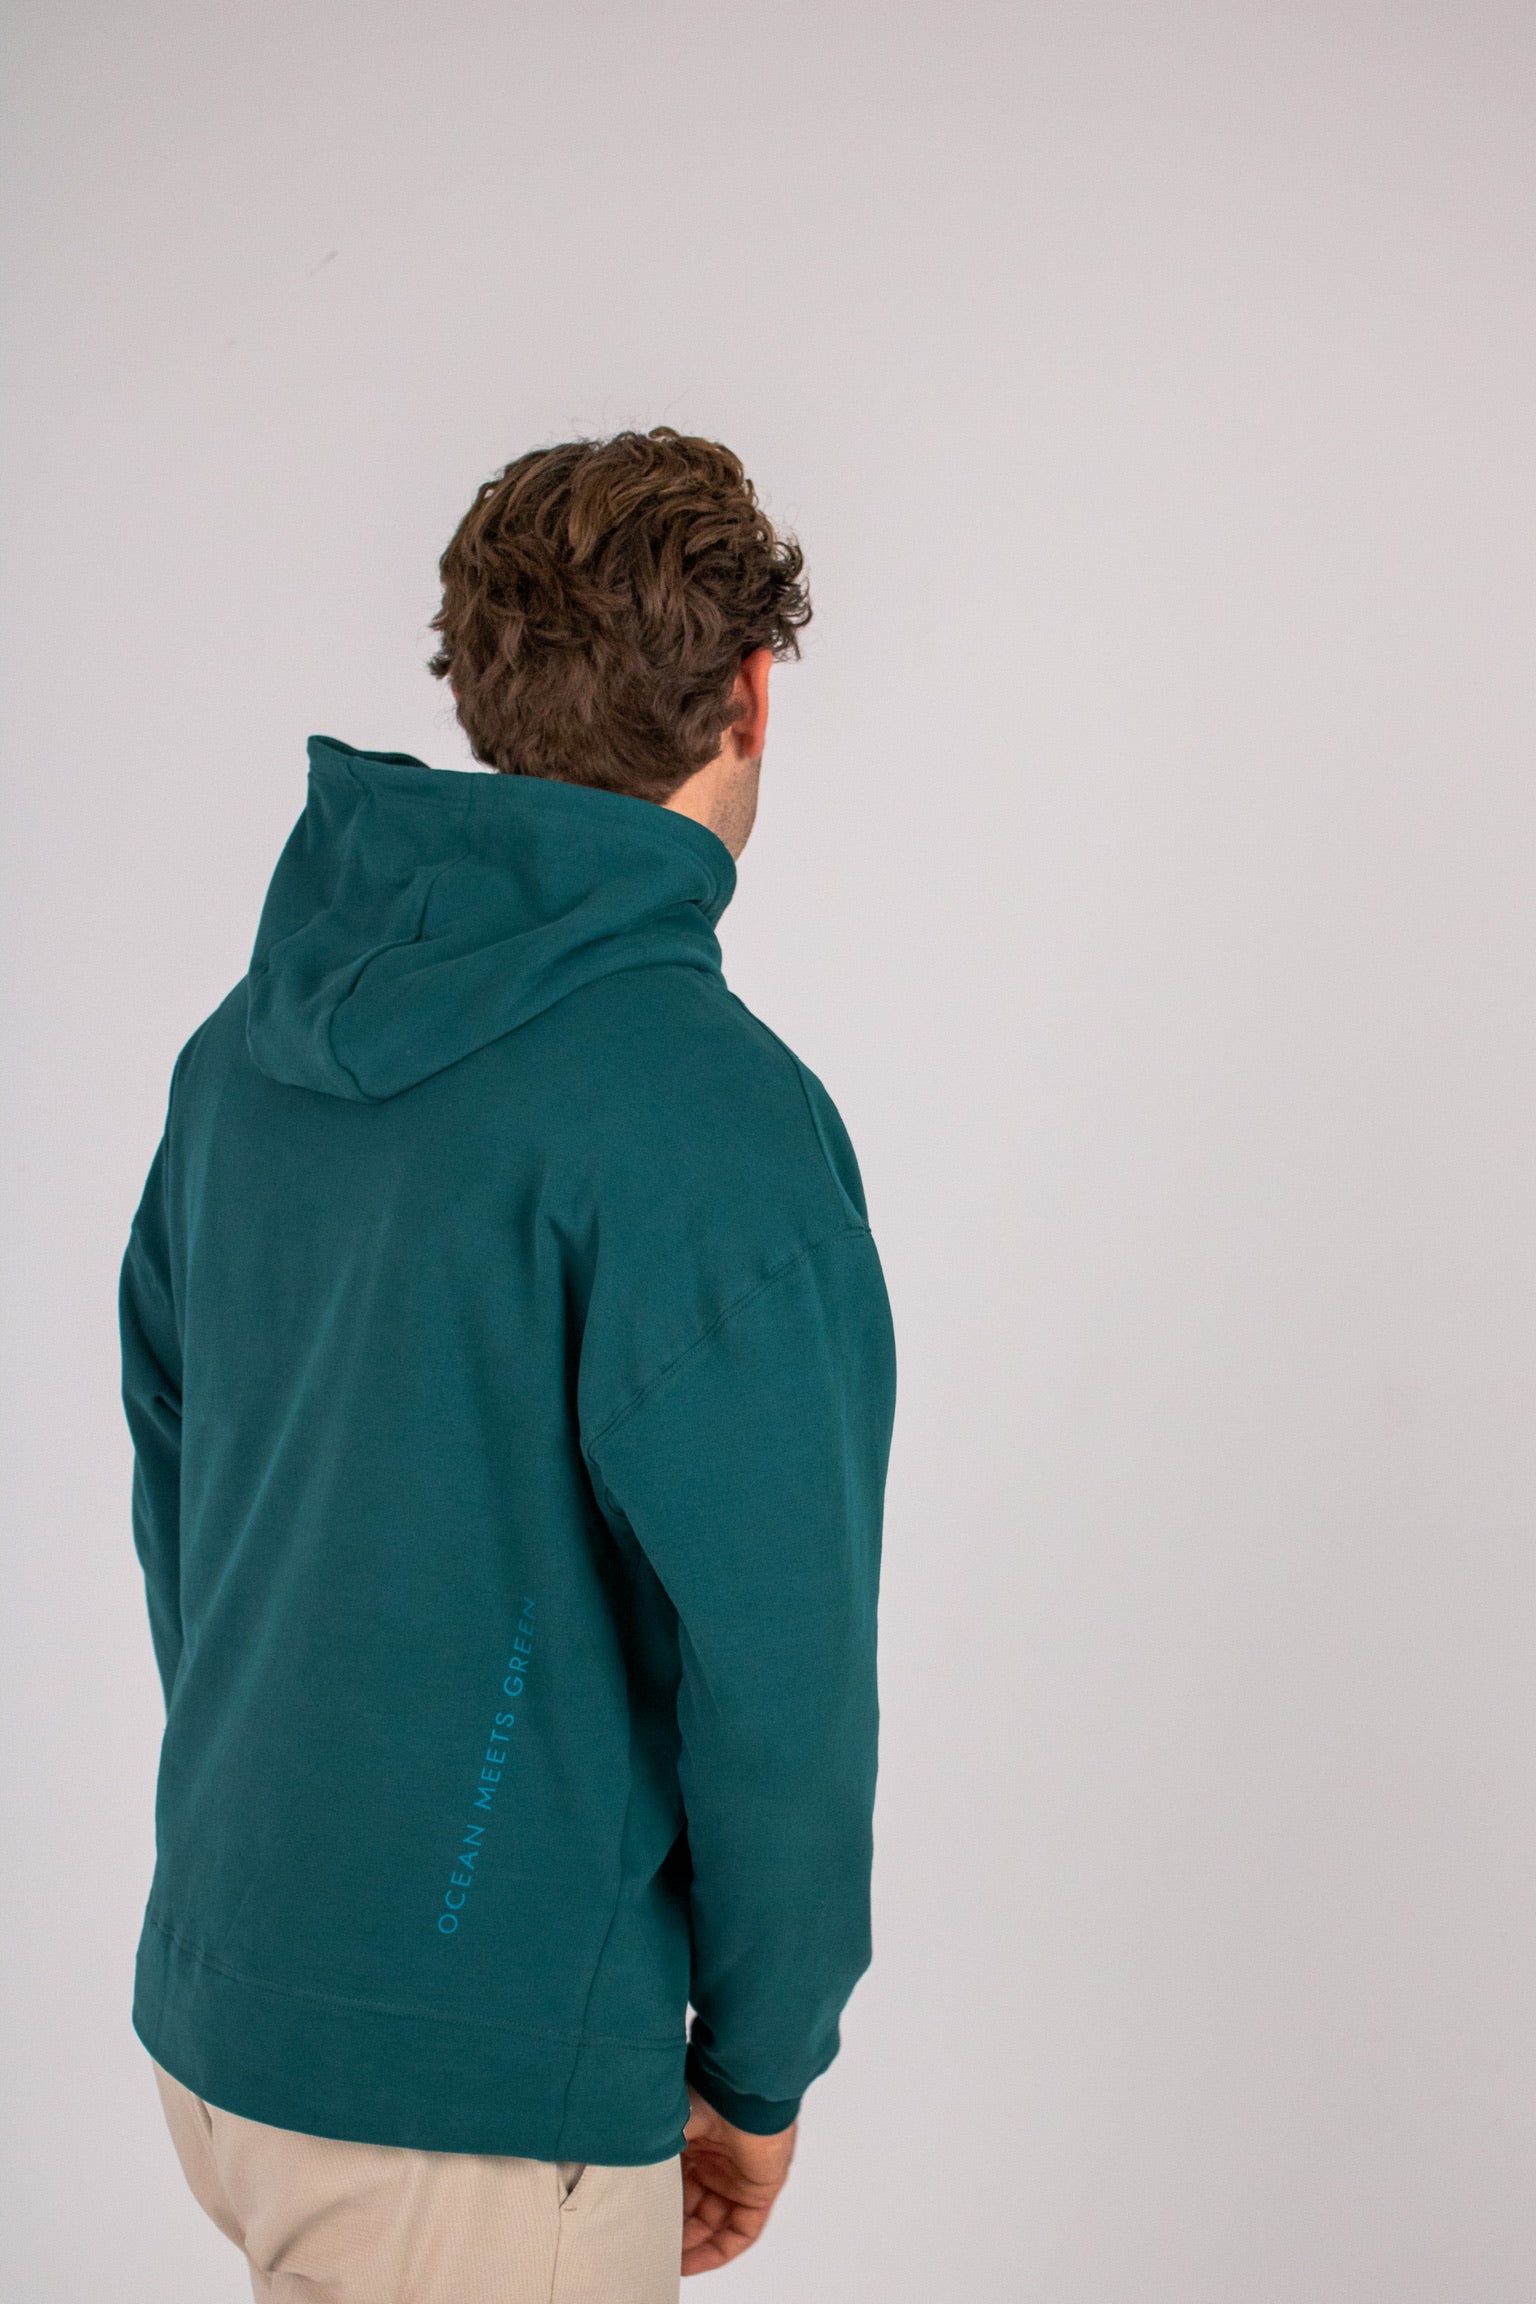 Full body image of Ocean Meets Green men's golf hoodie Wave in pine, showing the back